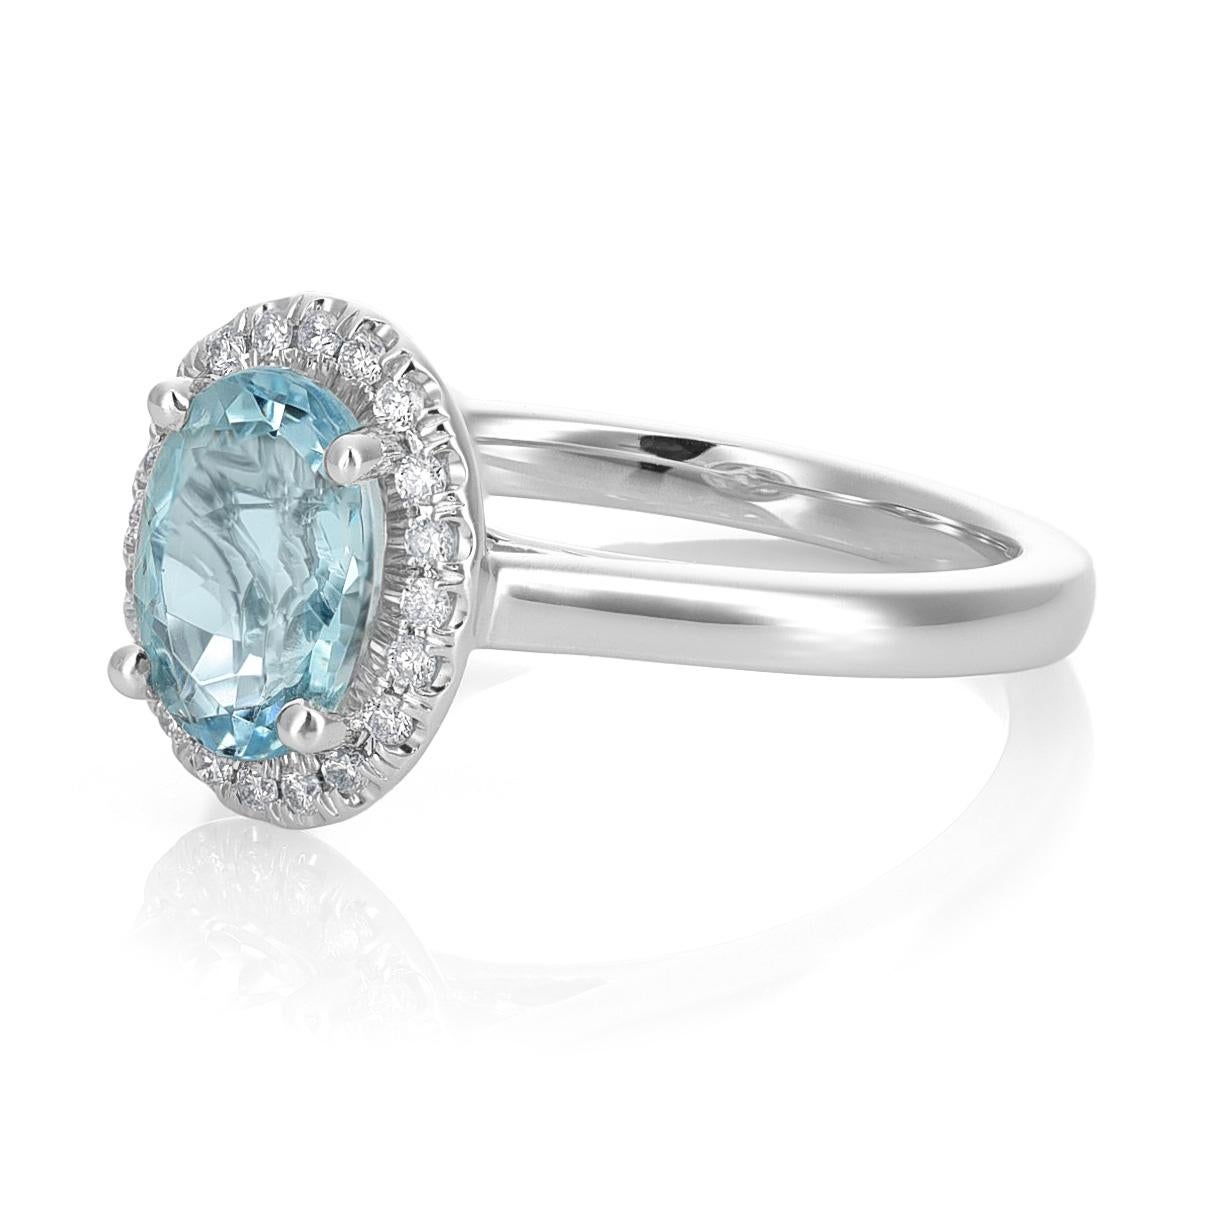 Introducing a captivating Natural Aquamarine Ring, featuring a 1.14 carats oval shape  Aquamarine set in 14K White Gold, embellished with 0.10 carats of Diamonds. The gentle blue hue of the Aquamarine, enhanced through a heating process, radiates a